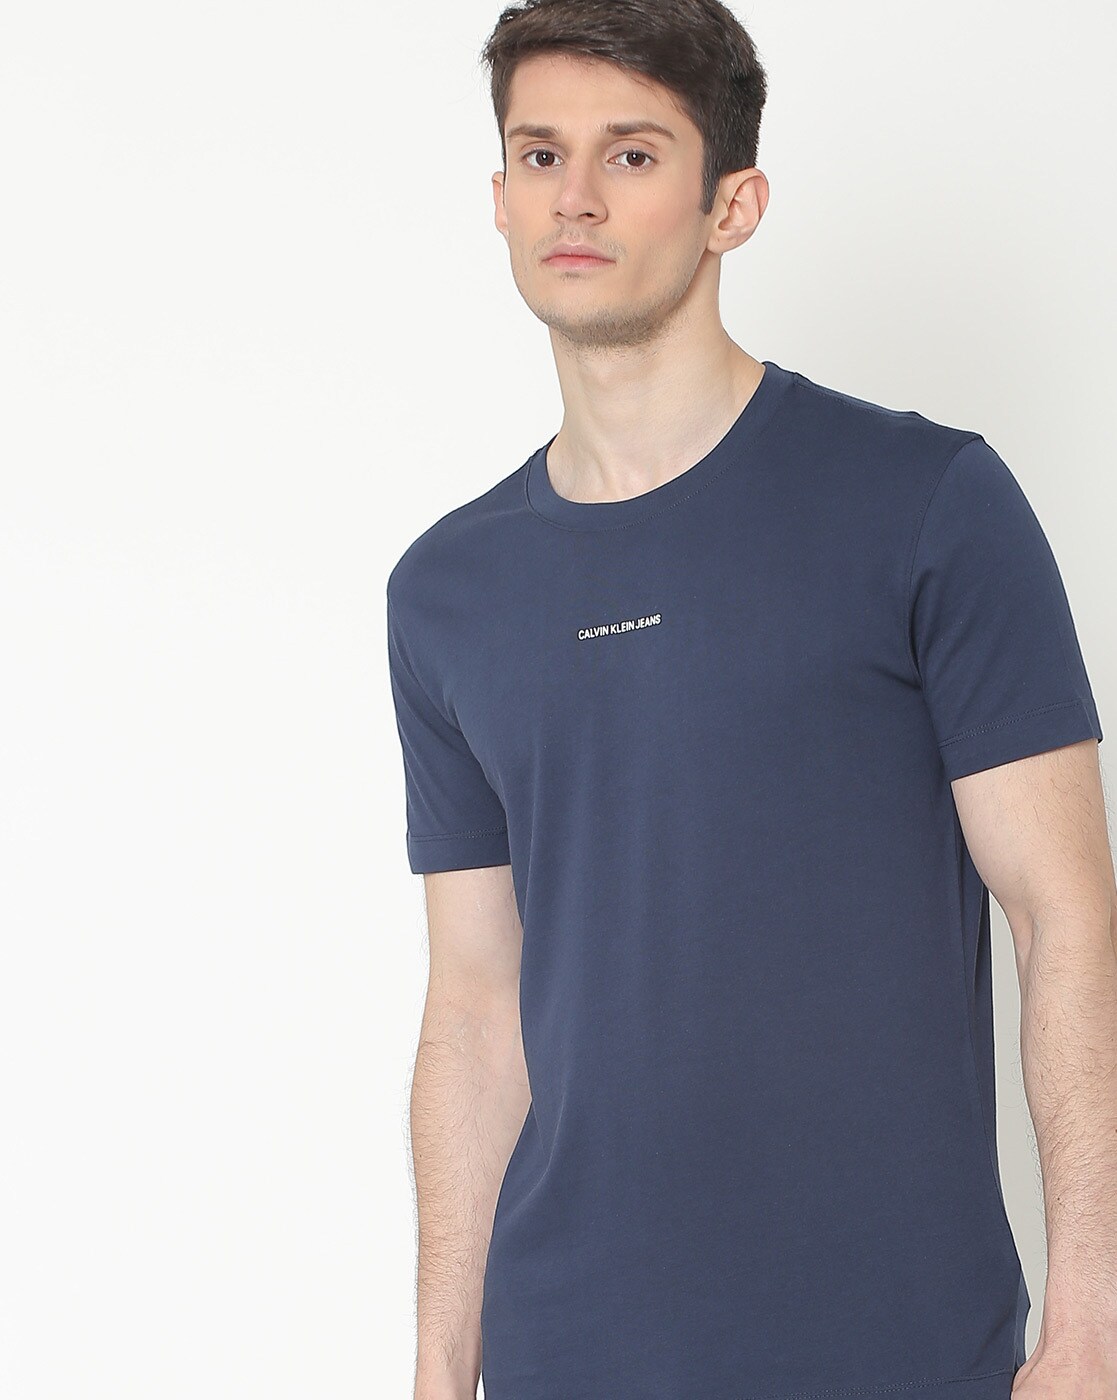 Buy Blue Tshirts for Men by Calvin Klein Jeans Online